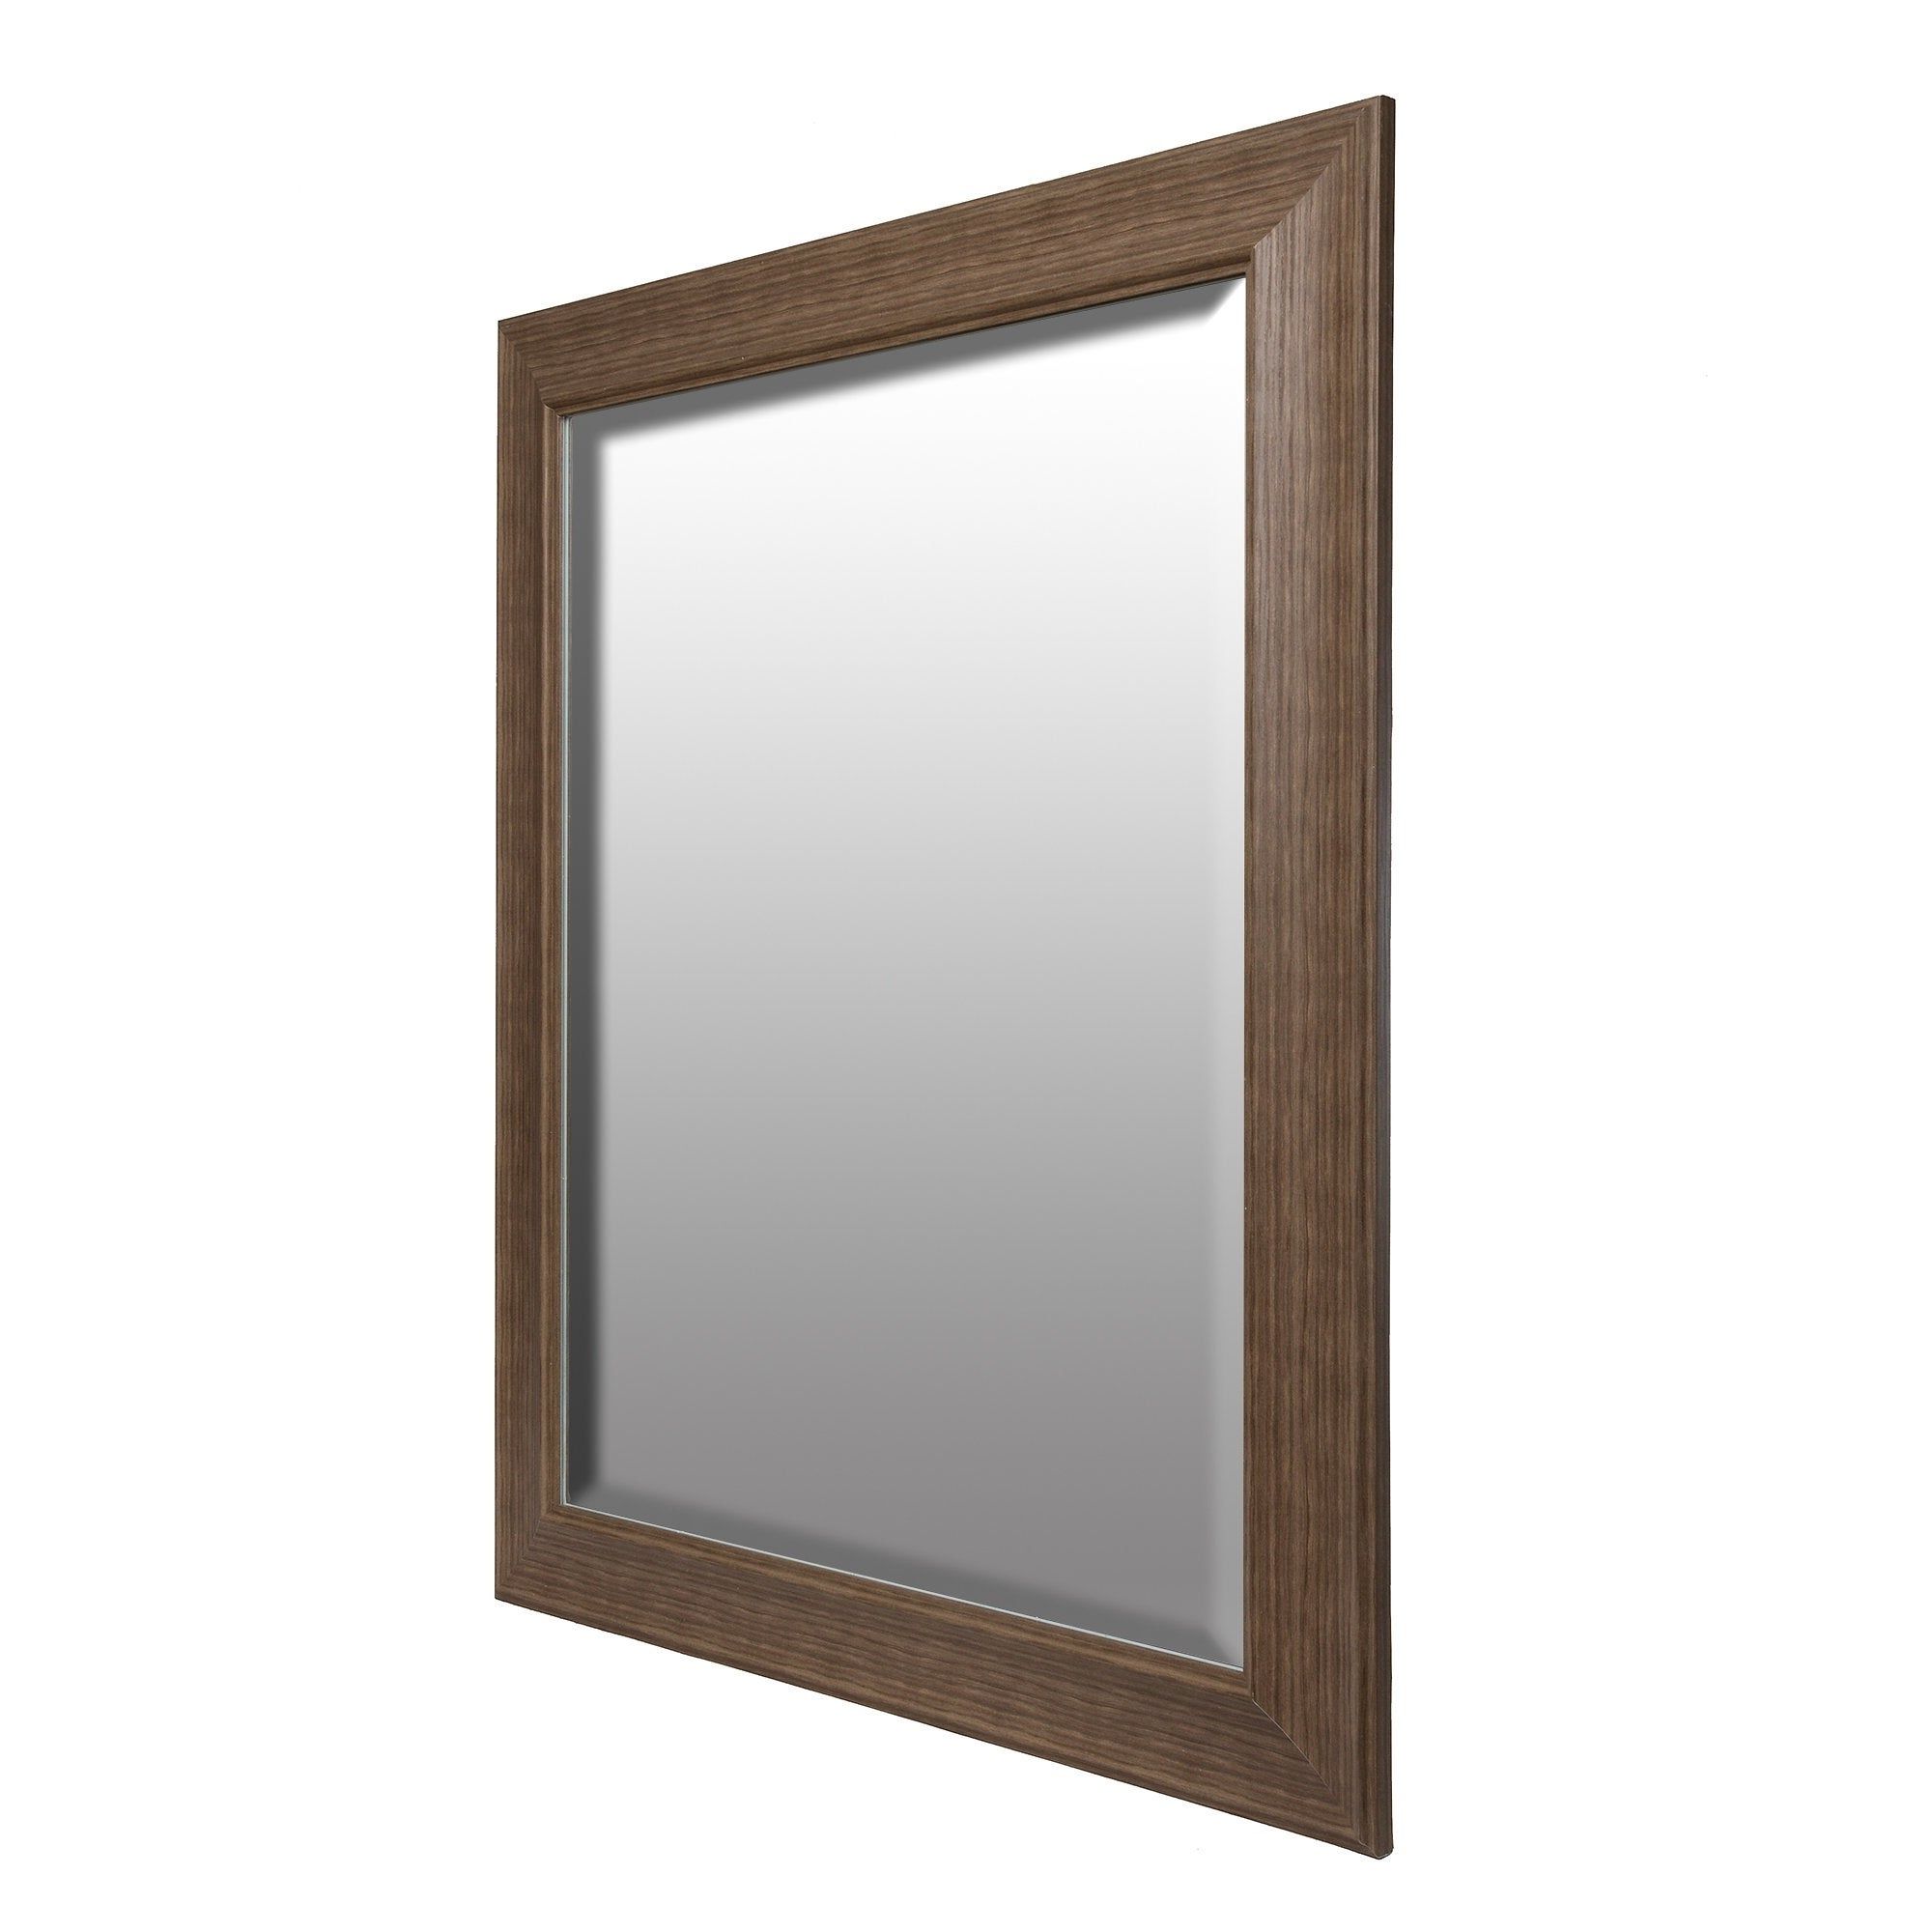 Most Recent Details About 22x28 Traditional Beveled Wall Mirror Inside Traditional Beveled Wall Mirrors (View 3 of 20)